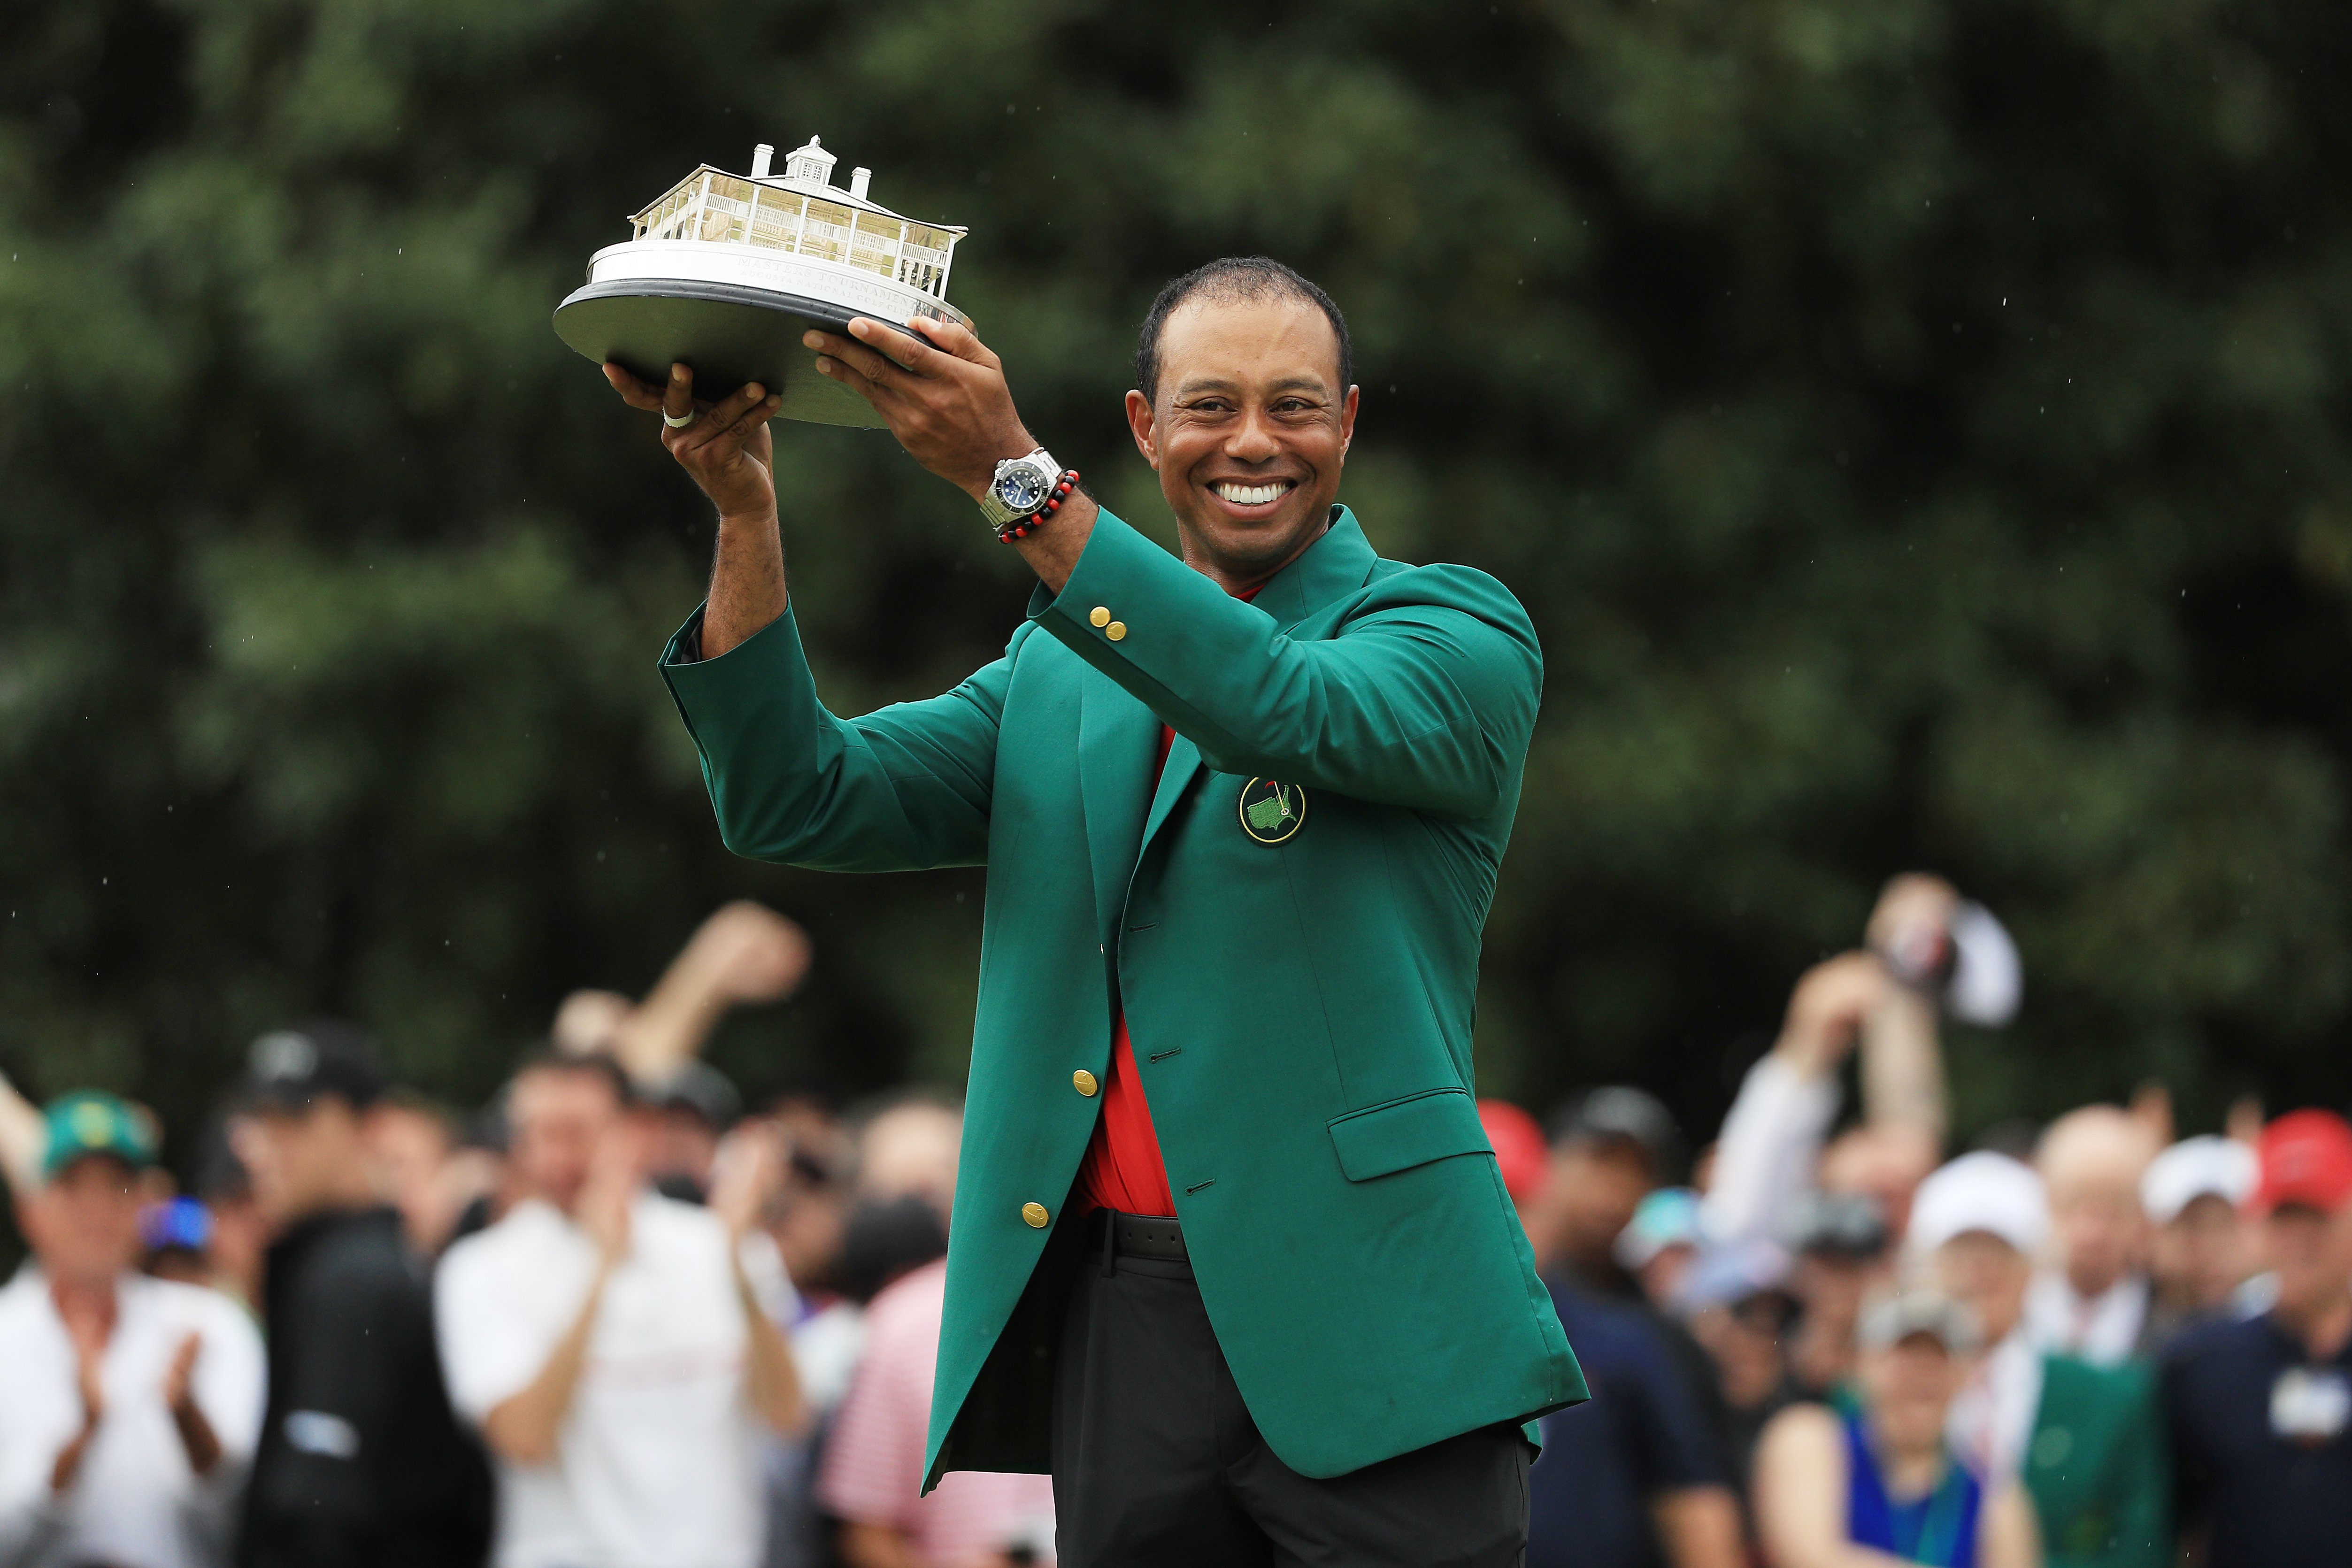 Tiger Woods after winning the Masters at Augusta National Golf Club on April 14, 2019. | Photo: GettyImages